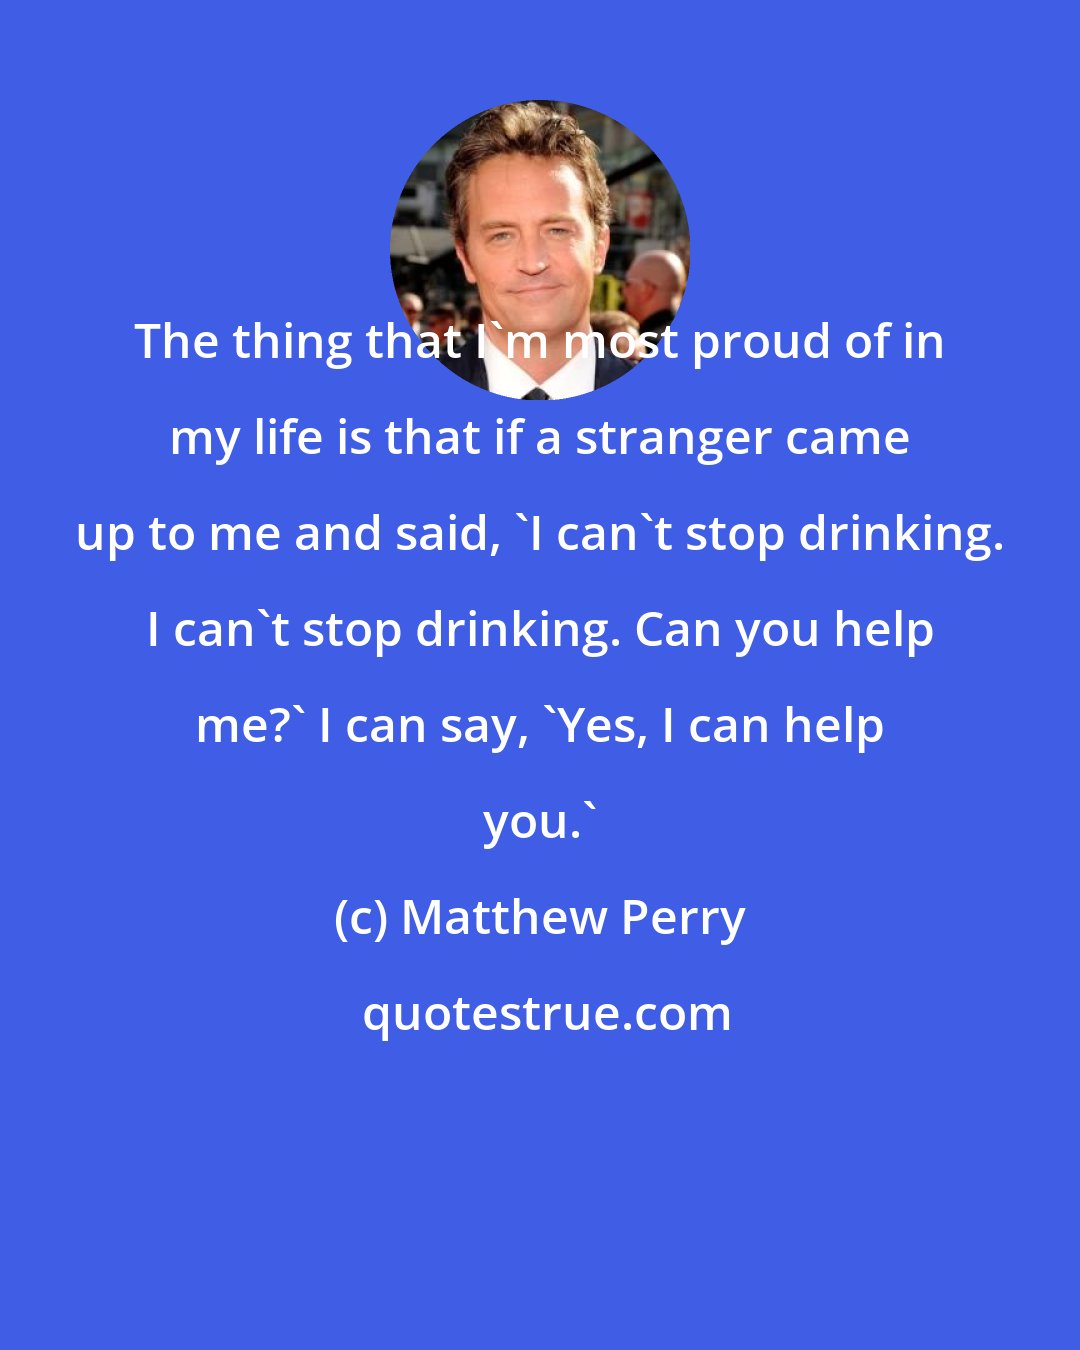 Matthew Perry: The thing that I'm most proud of in my life is that if a stranger came up to me and said, 'I can't stop drinking. I can't stop drinking. Can you help me?' I can say, 'Yes, I can help you.'